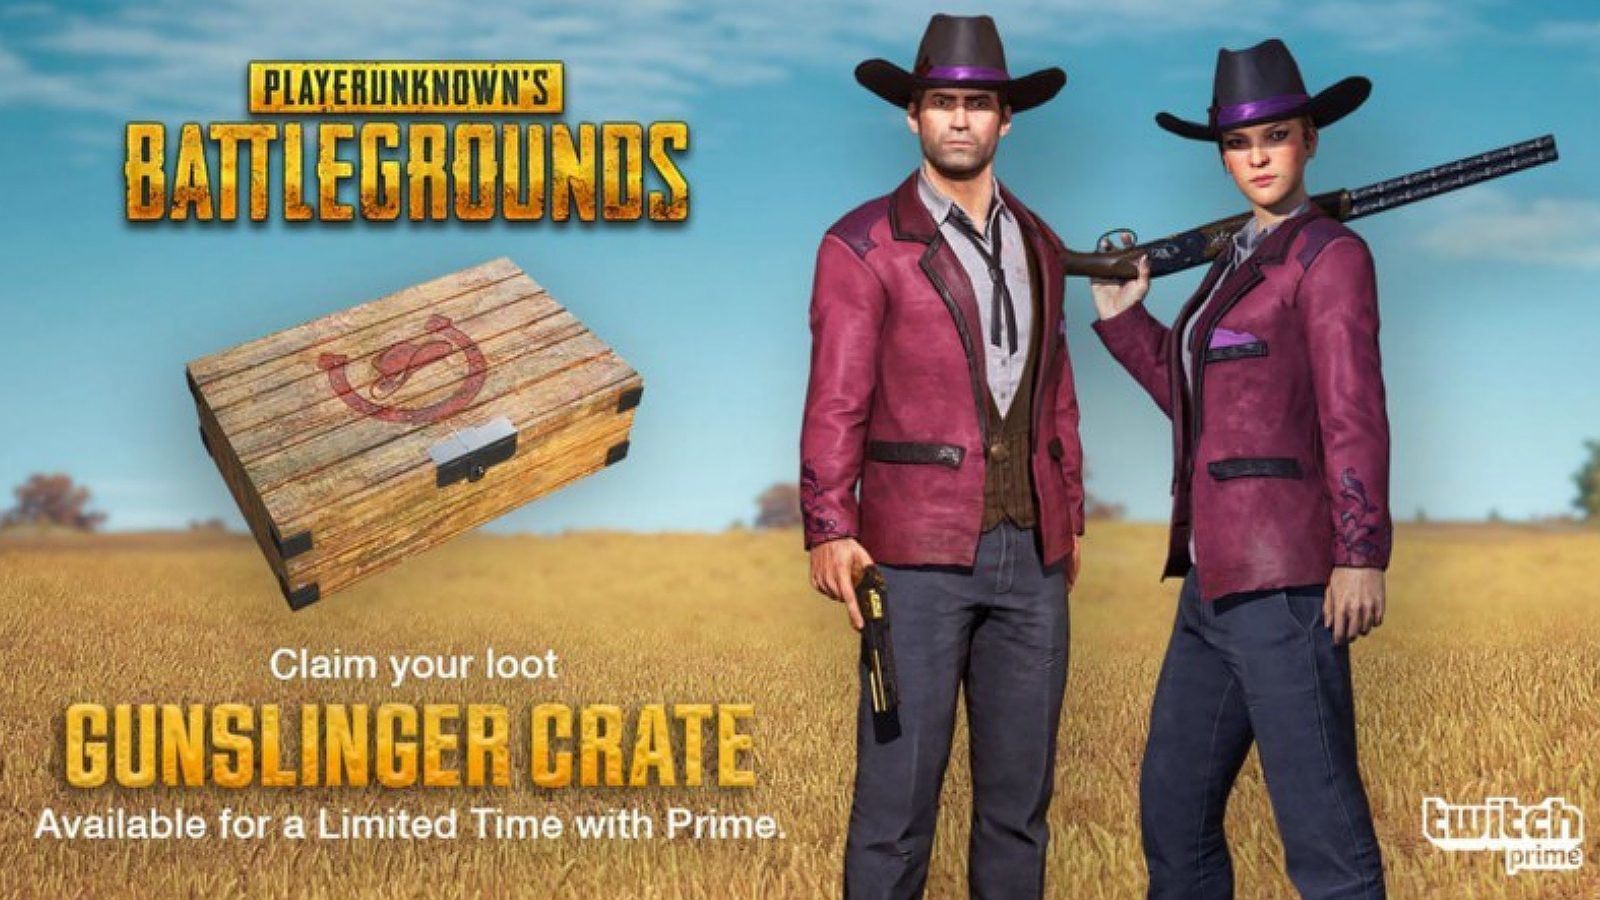 How to get free Cowboy loot in PUBG with Twitch Prime - Dexerto